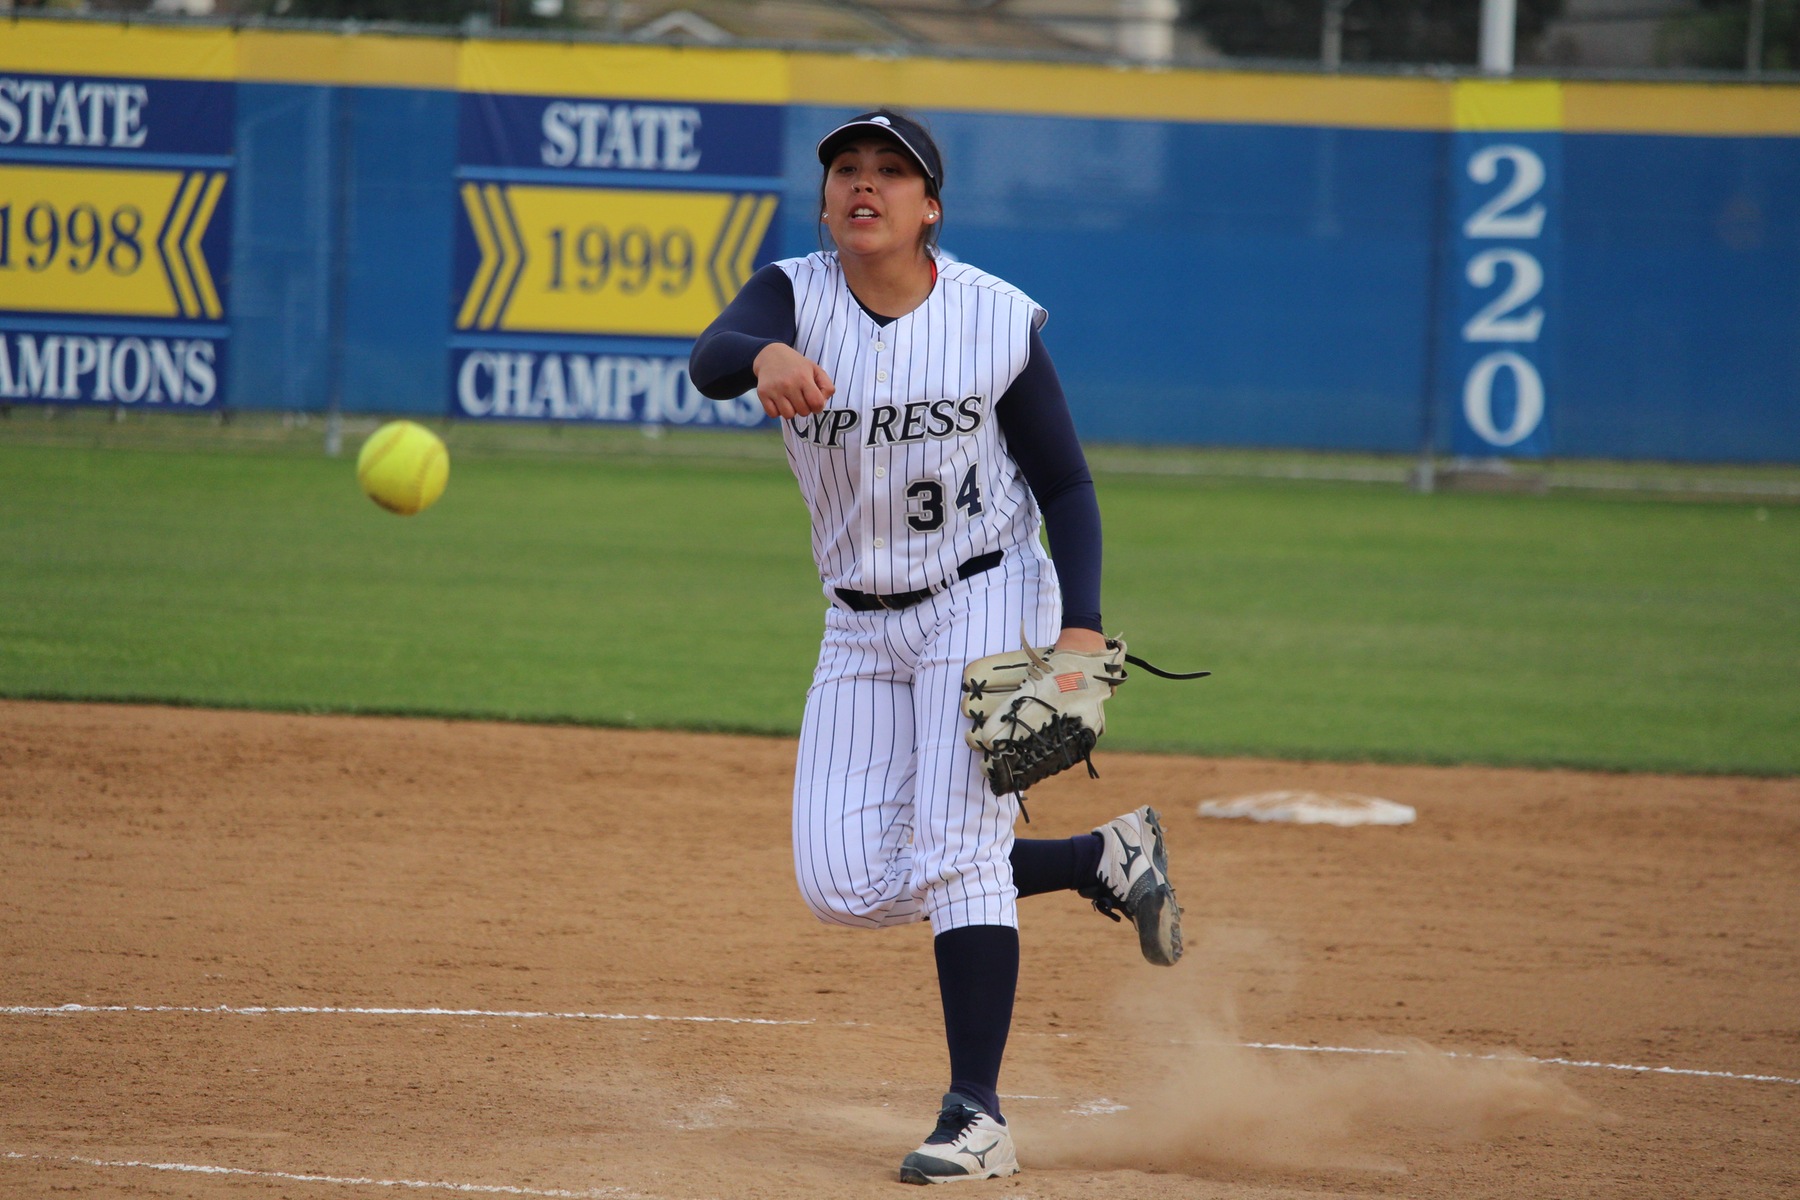 No. 1 Chargers Outpace Gauchos for 62nd Consecutive Win, 13-4